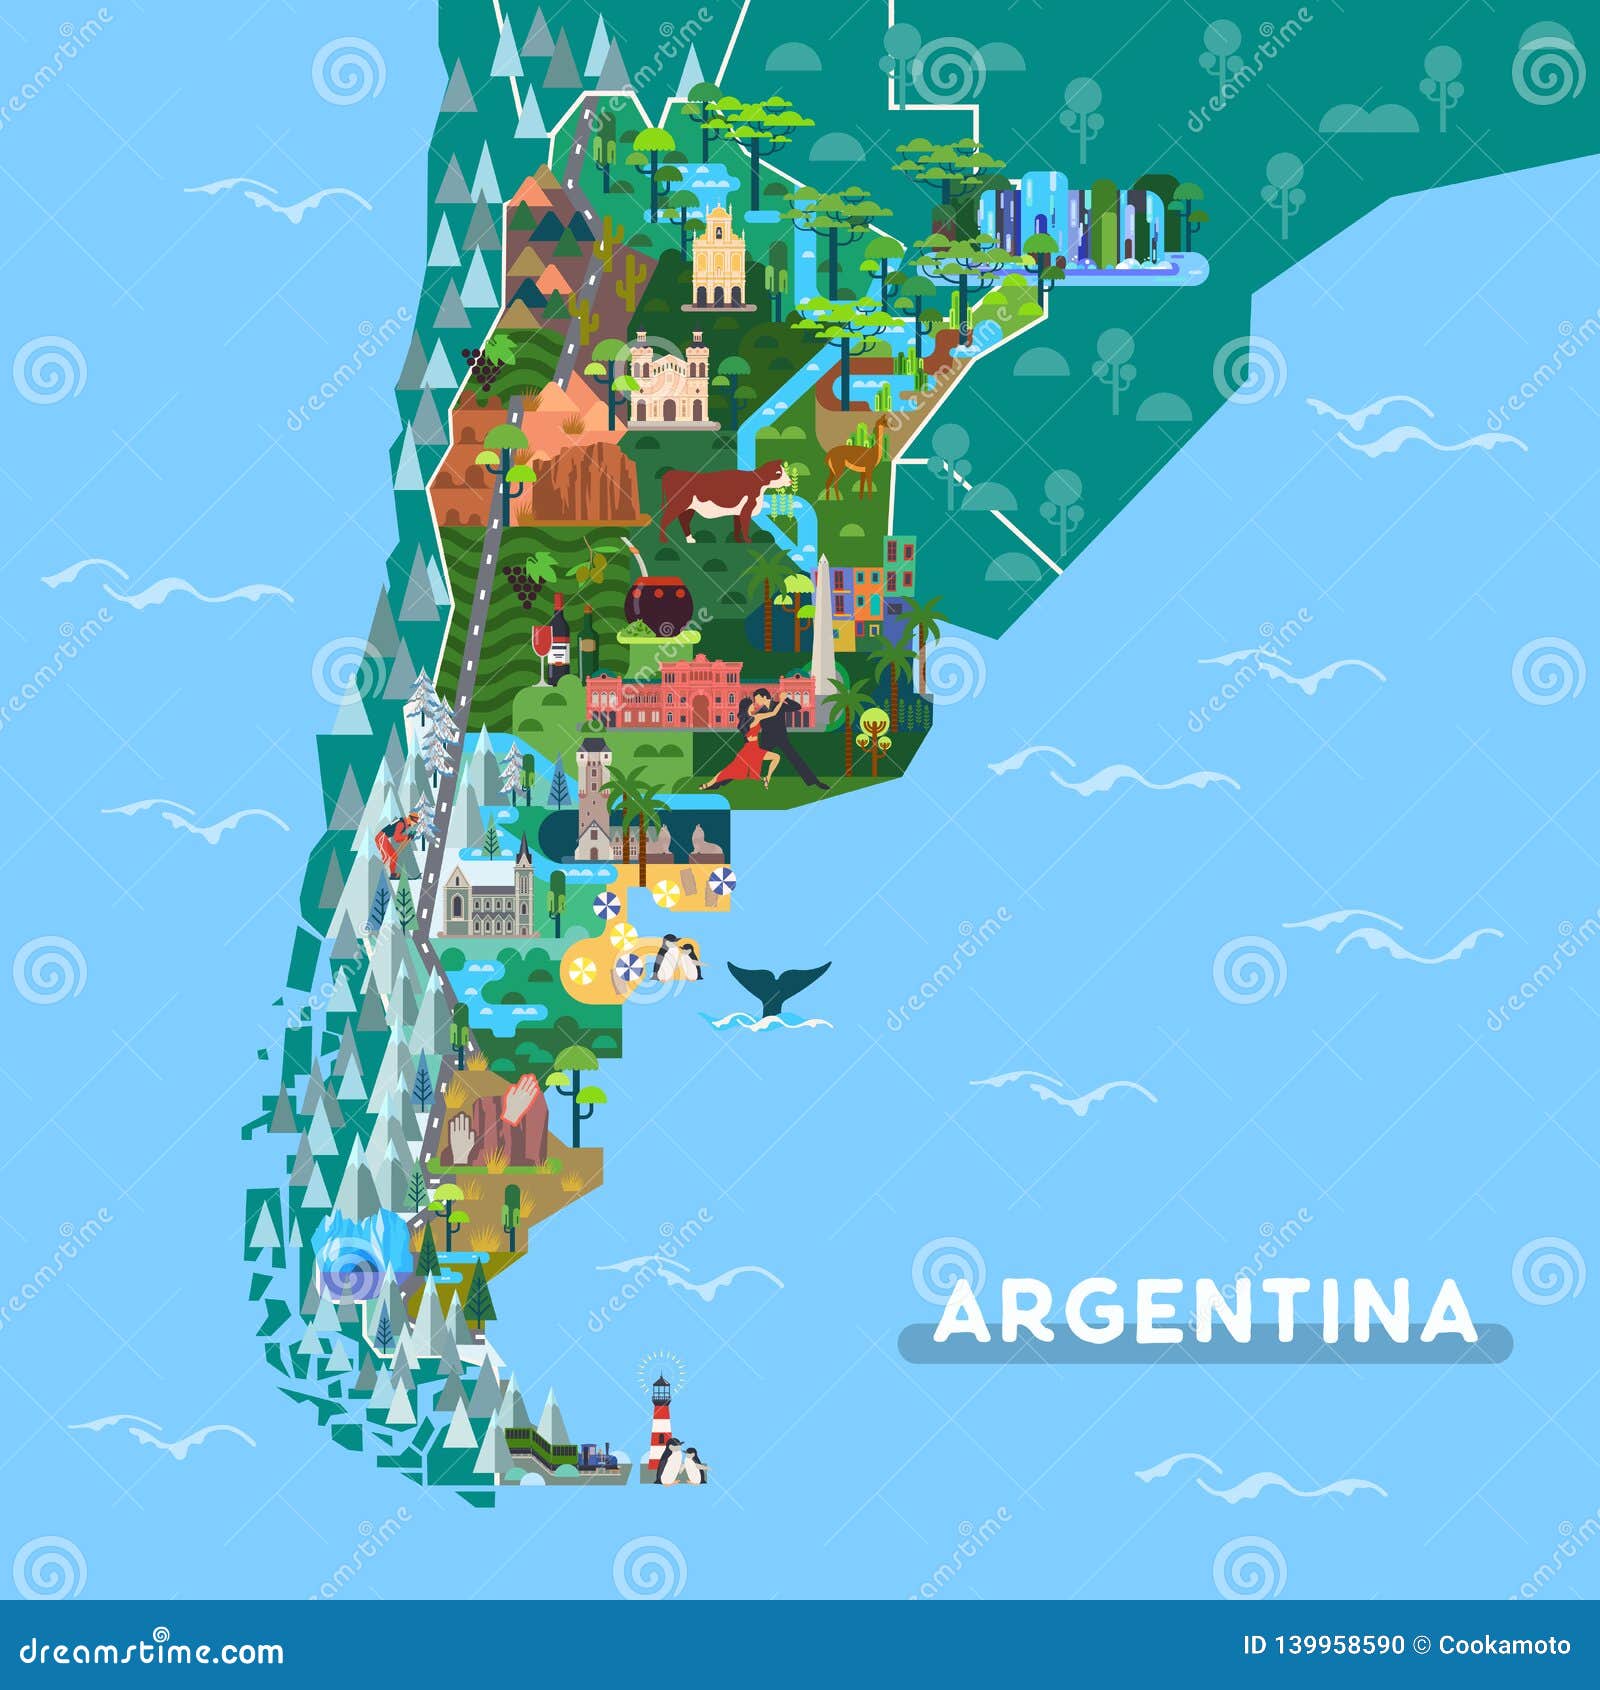 landmarks or sightseeing places on argentina map